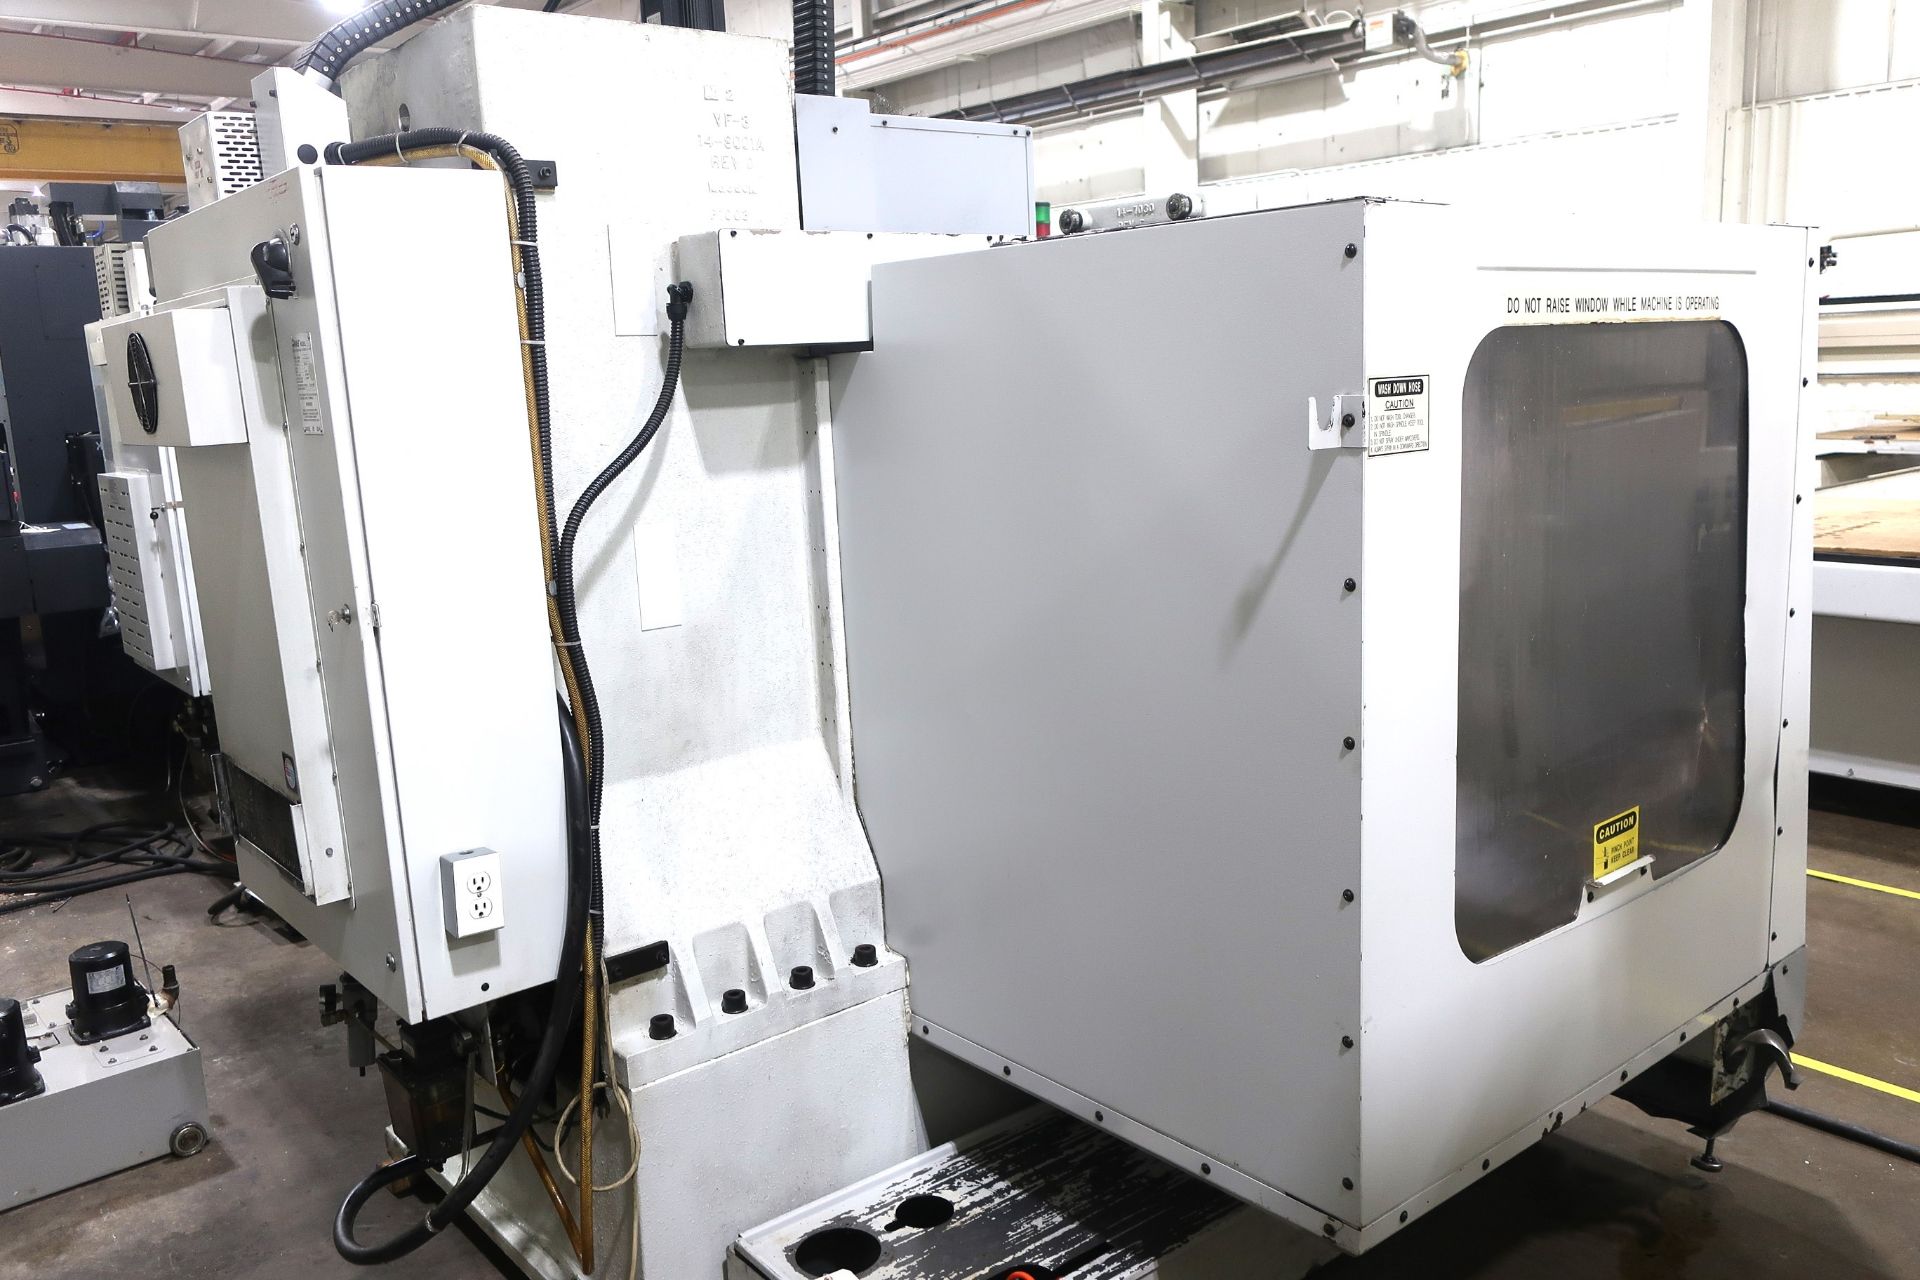 HAAS VF-4 CNC VERTICAL MACHINING CENTER, S/N 7443, NEW 1996 - Image 6 of 7